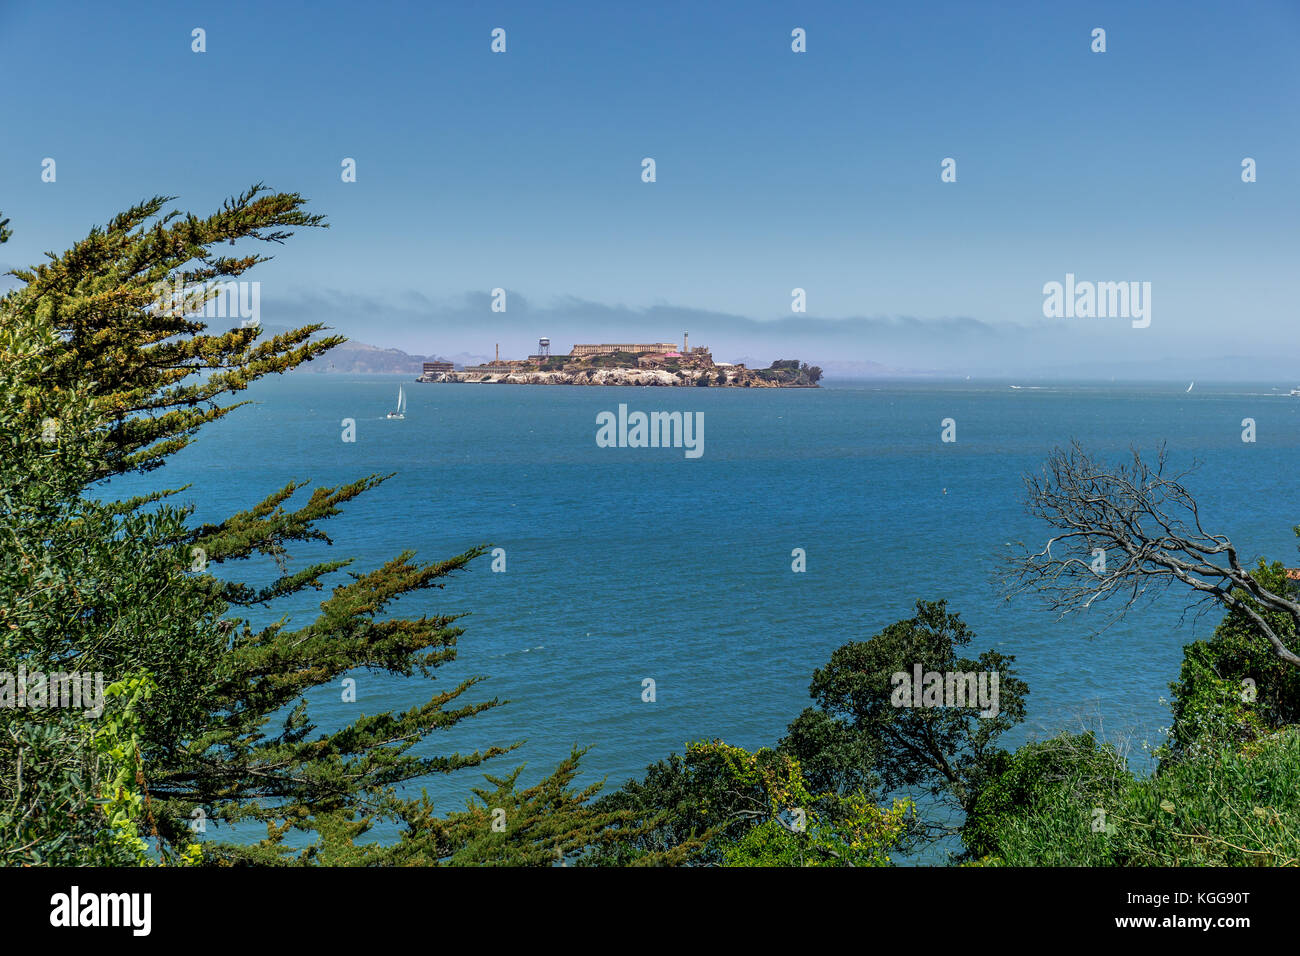 The prison and island of Alcatraz in San Francisco Bay on a rare fog free day Stock Photo